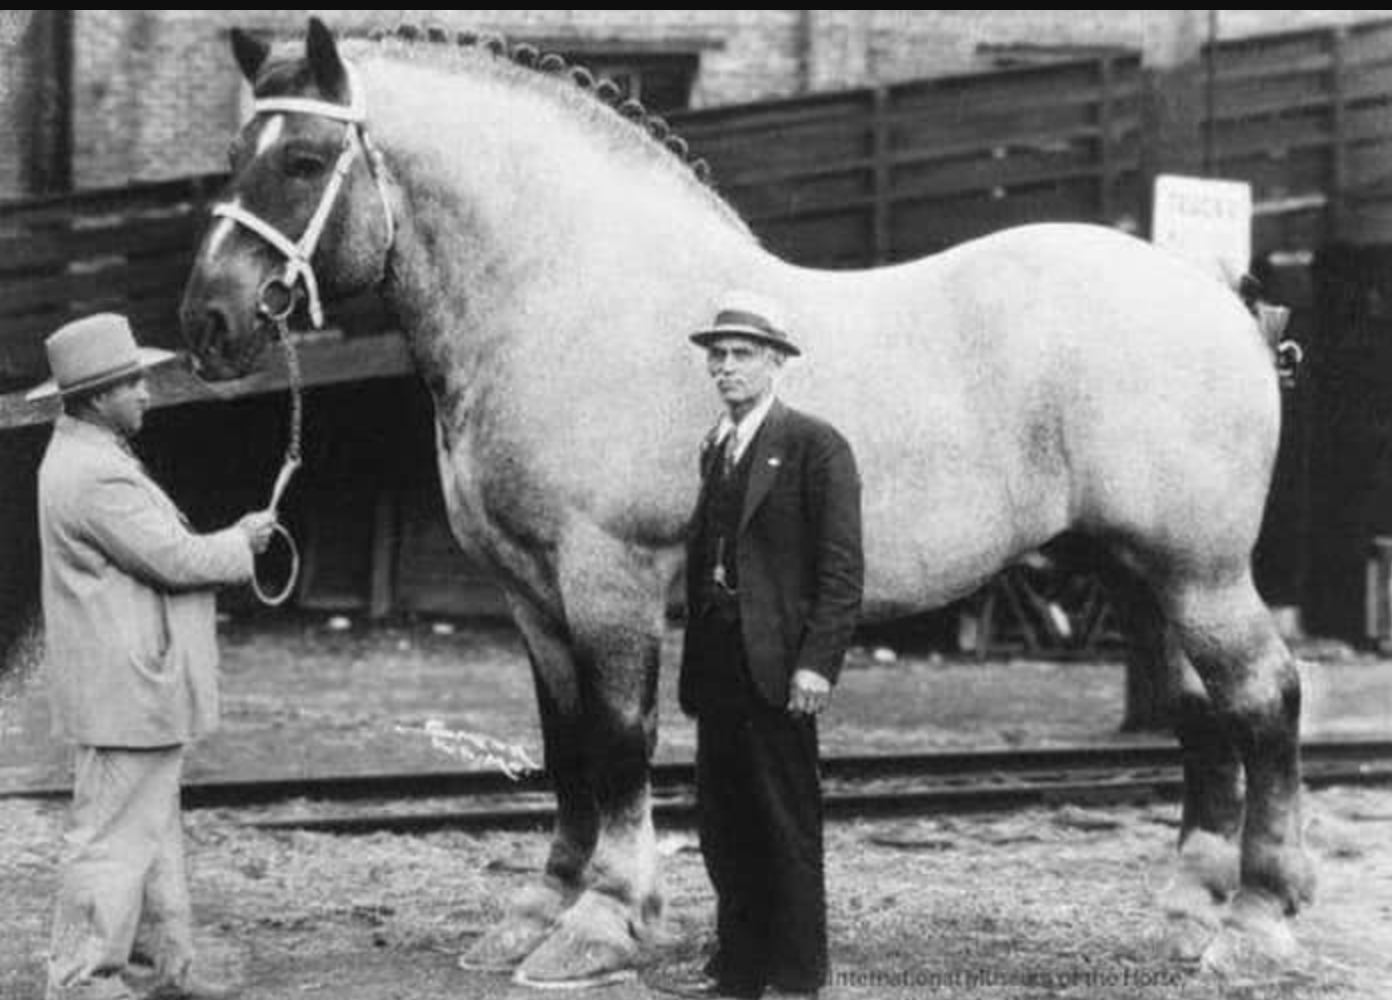 Sampson the largest recorded horse. Public domain.